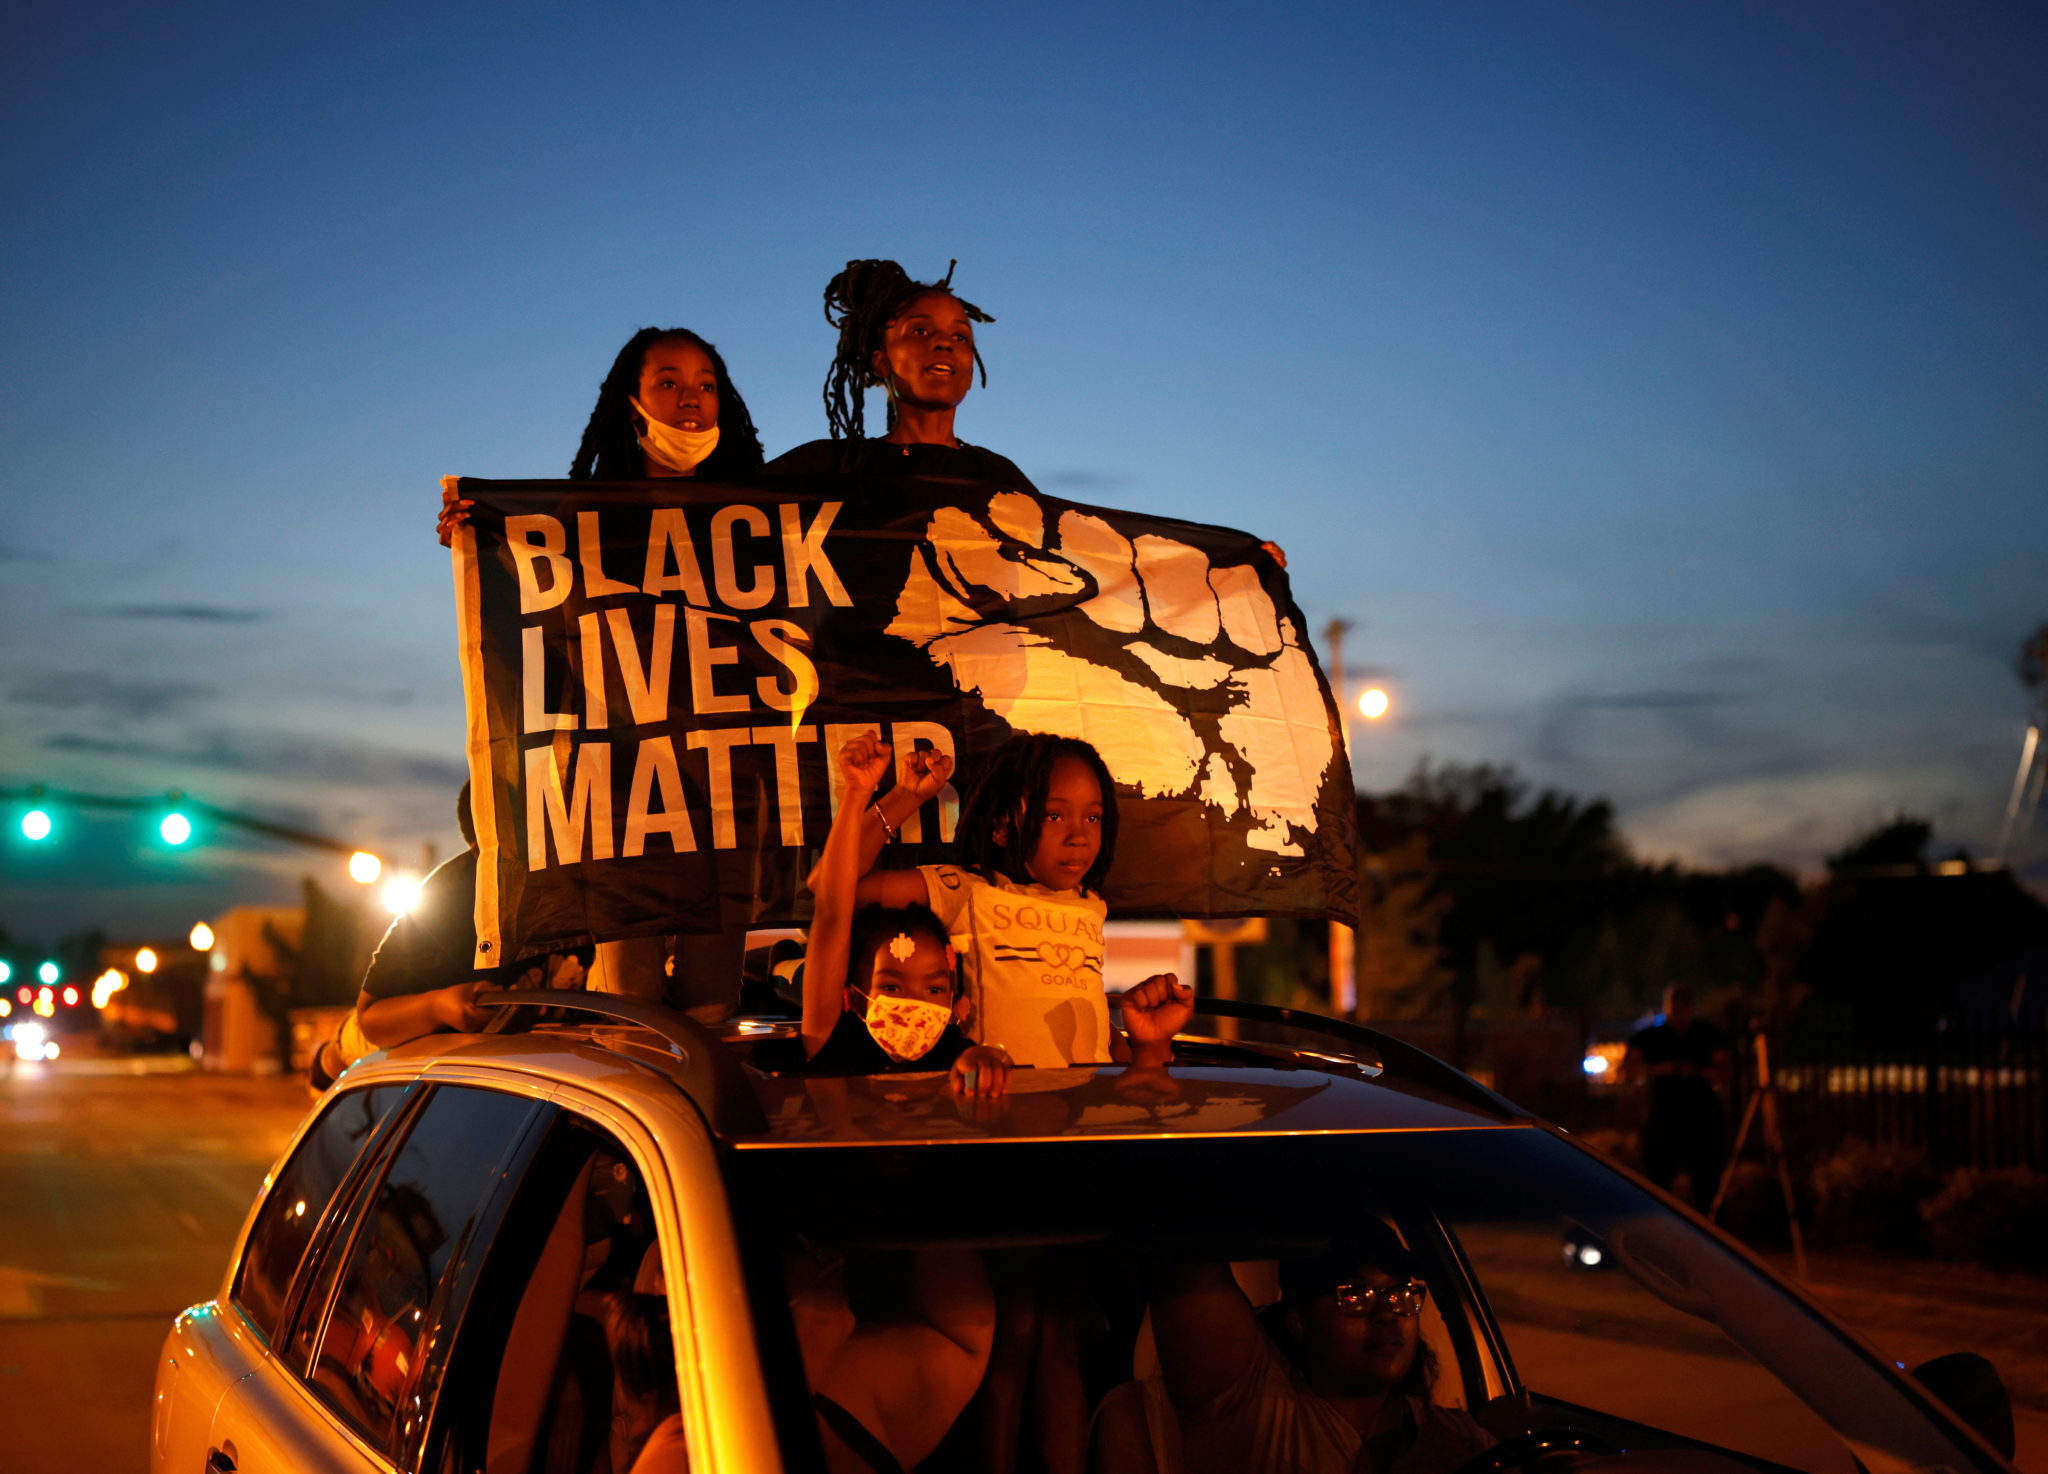 A group of Black protesters stand through the sunroof of a car with a large protest banner which reads 'Black Lives Matter' with a Black power fist.